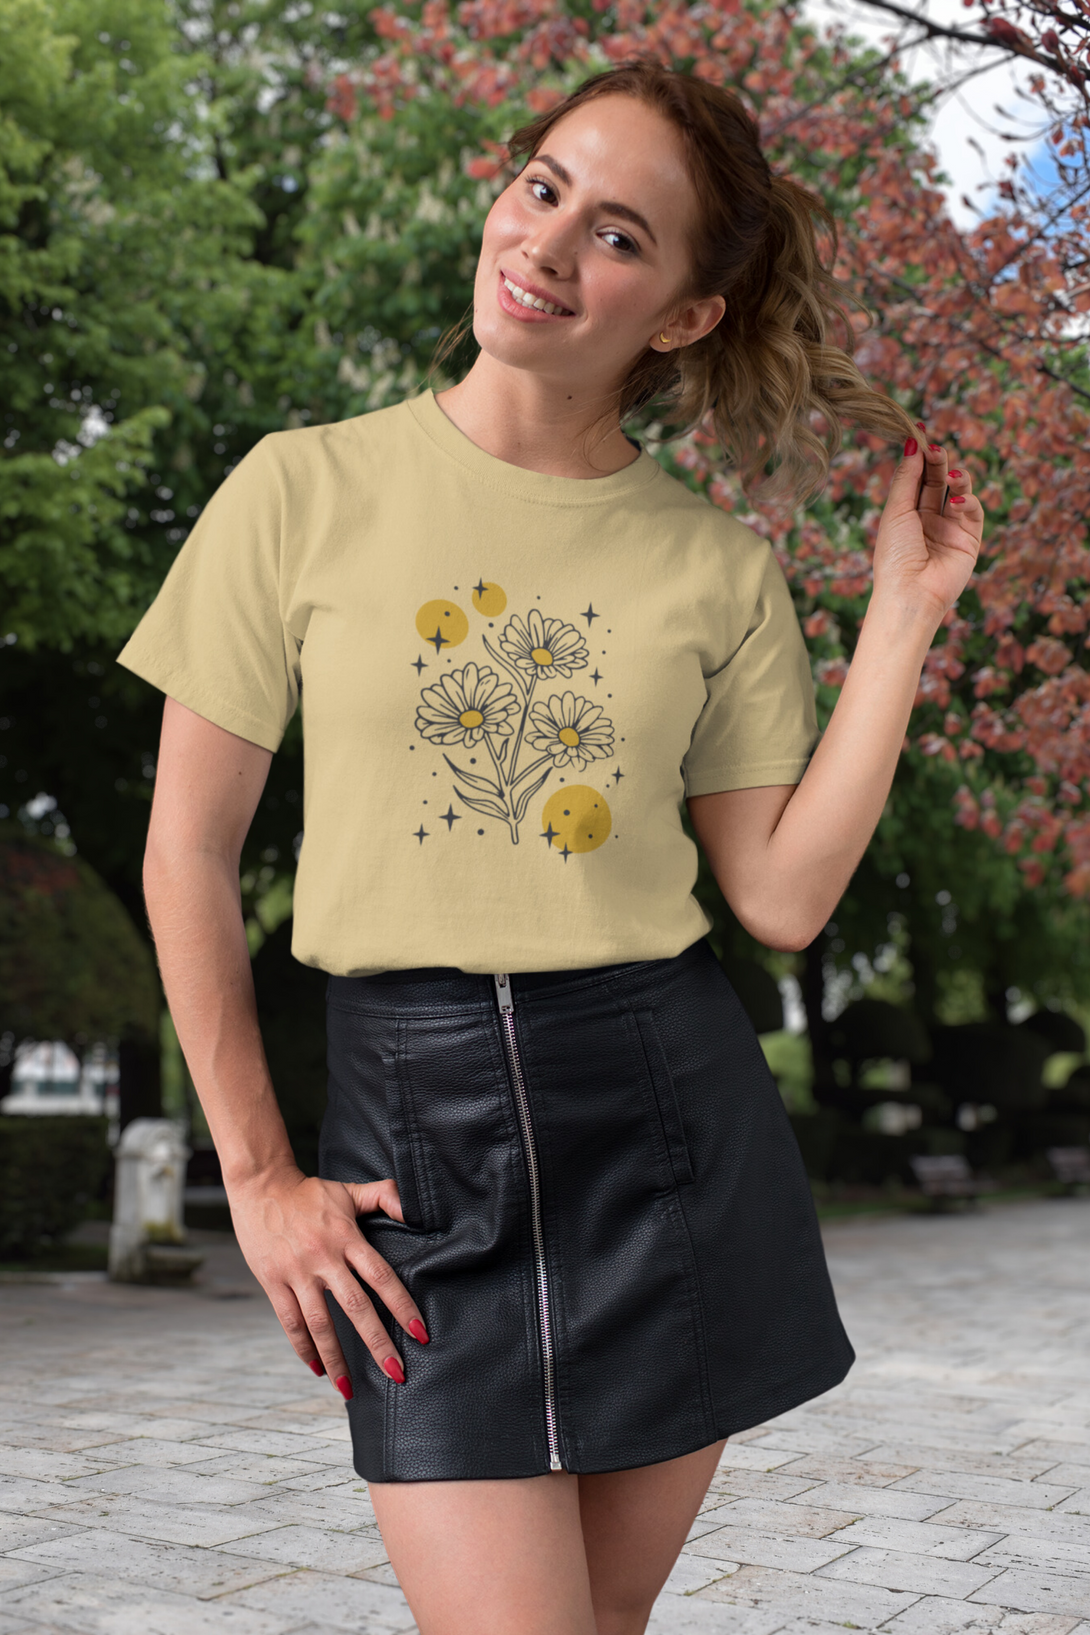 Sparkling Flowers Printed T-Shirt For Women - WowWaves - 2